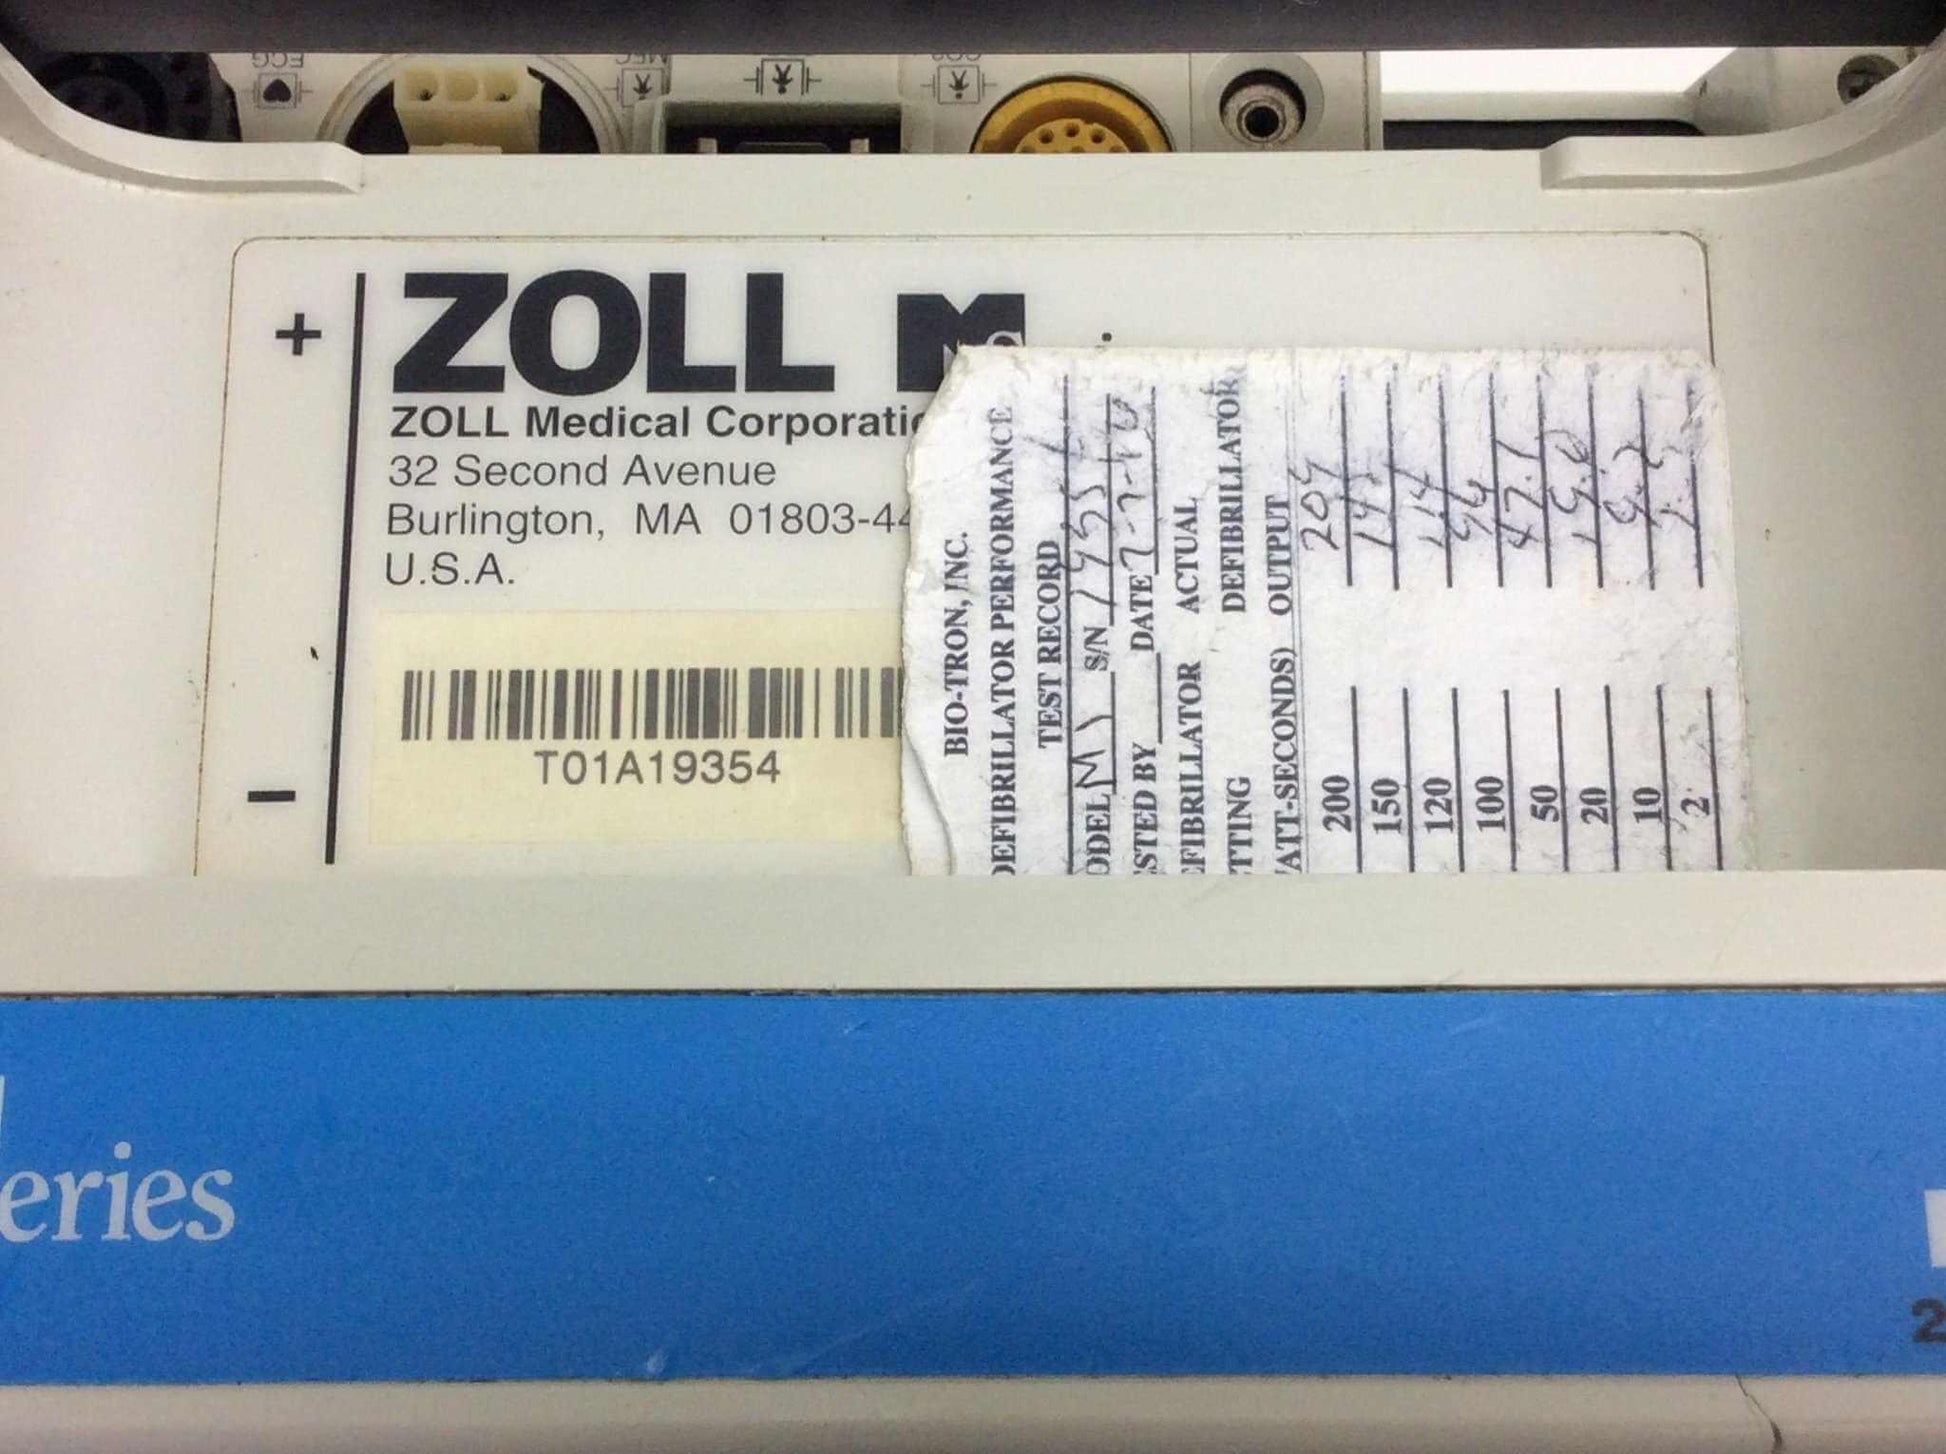 USED ZOLL M Series CCT Biphasic 200 JOULES MAX Defibrillator 12SL Program With Accessories Warranty FREE SHIPPING - MBR Medicals